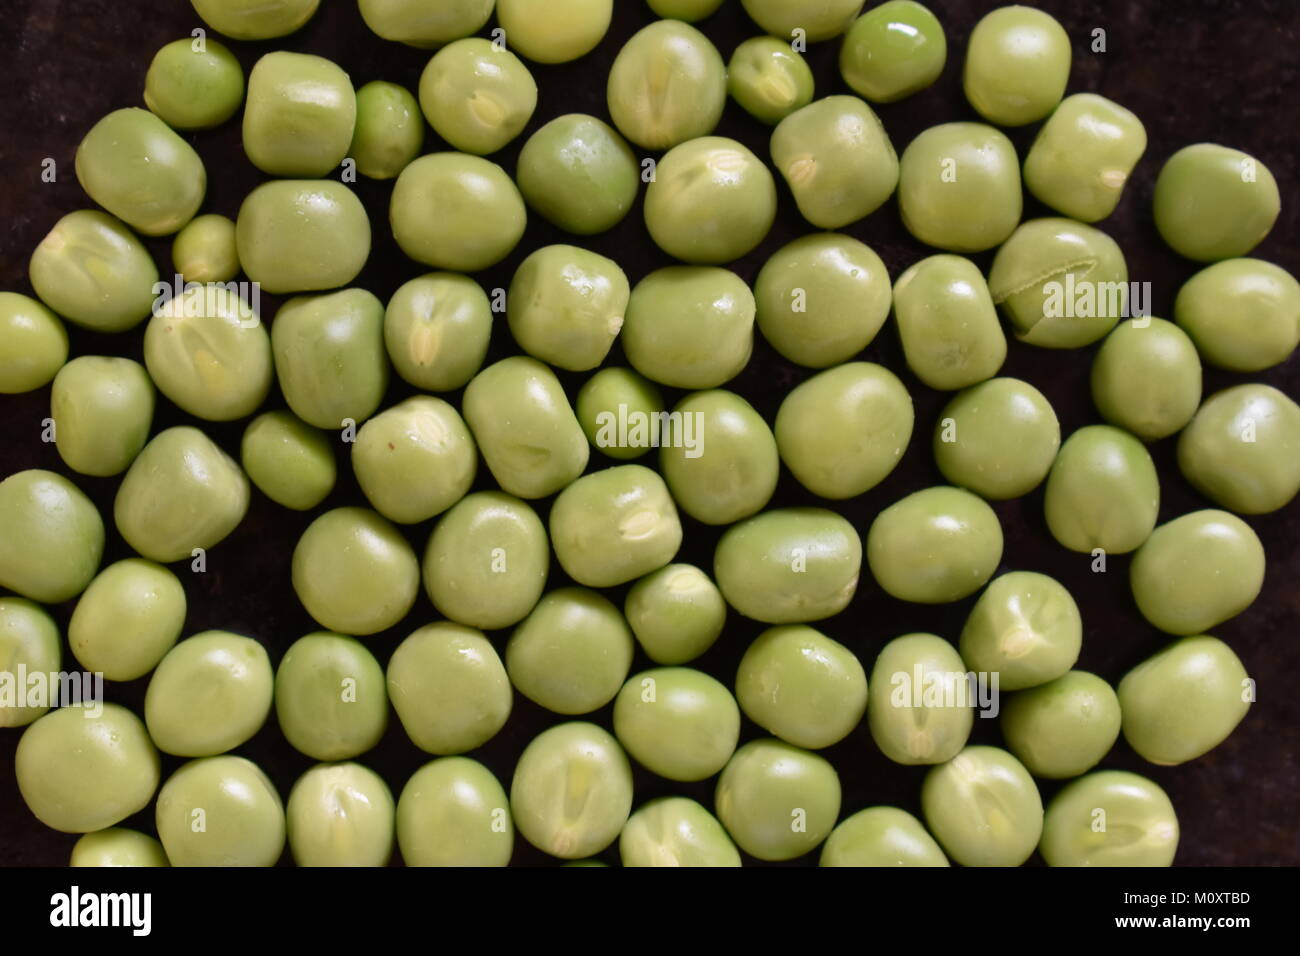 Close view of green pea looking awesome. Stock Photo